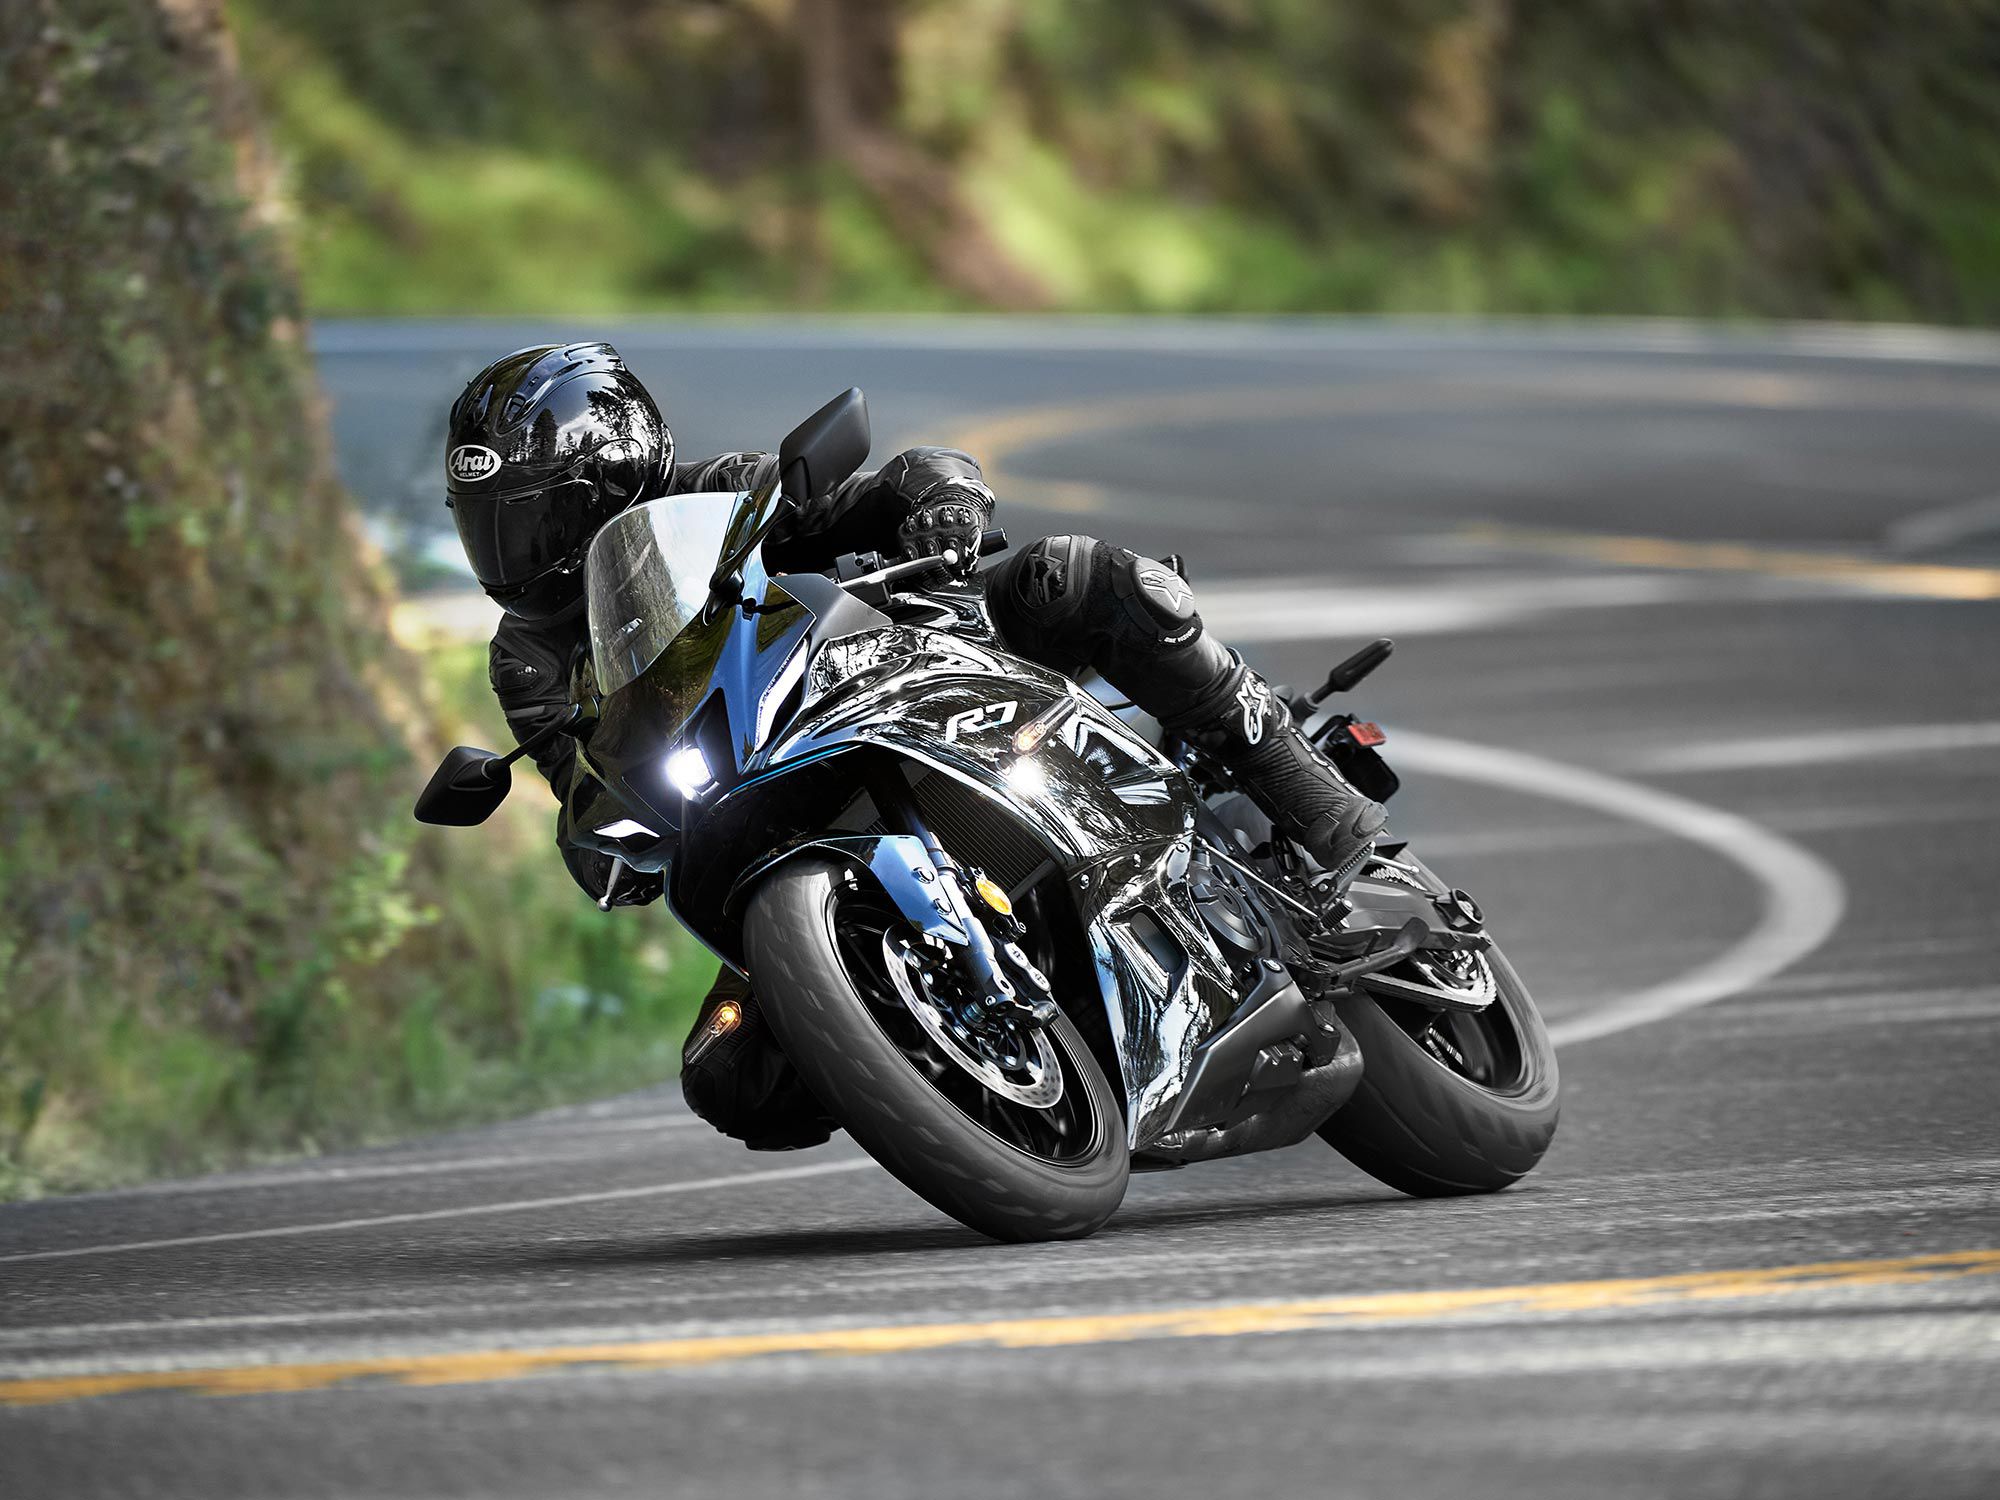 Unlike the outgoing YZF-R6 and YZF-R1, the R7 isn’t designed specifically for competition. Instead, it’s a fun and affordable streetbike that can do a little bit of everything.